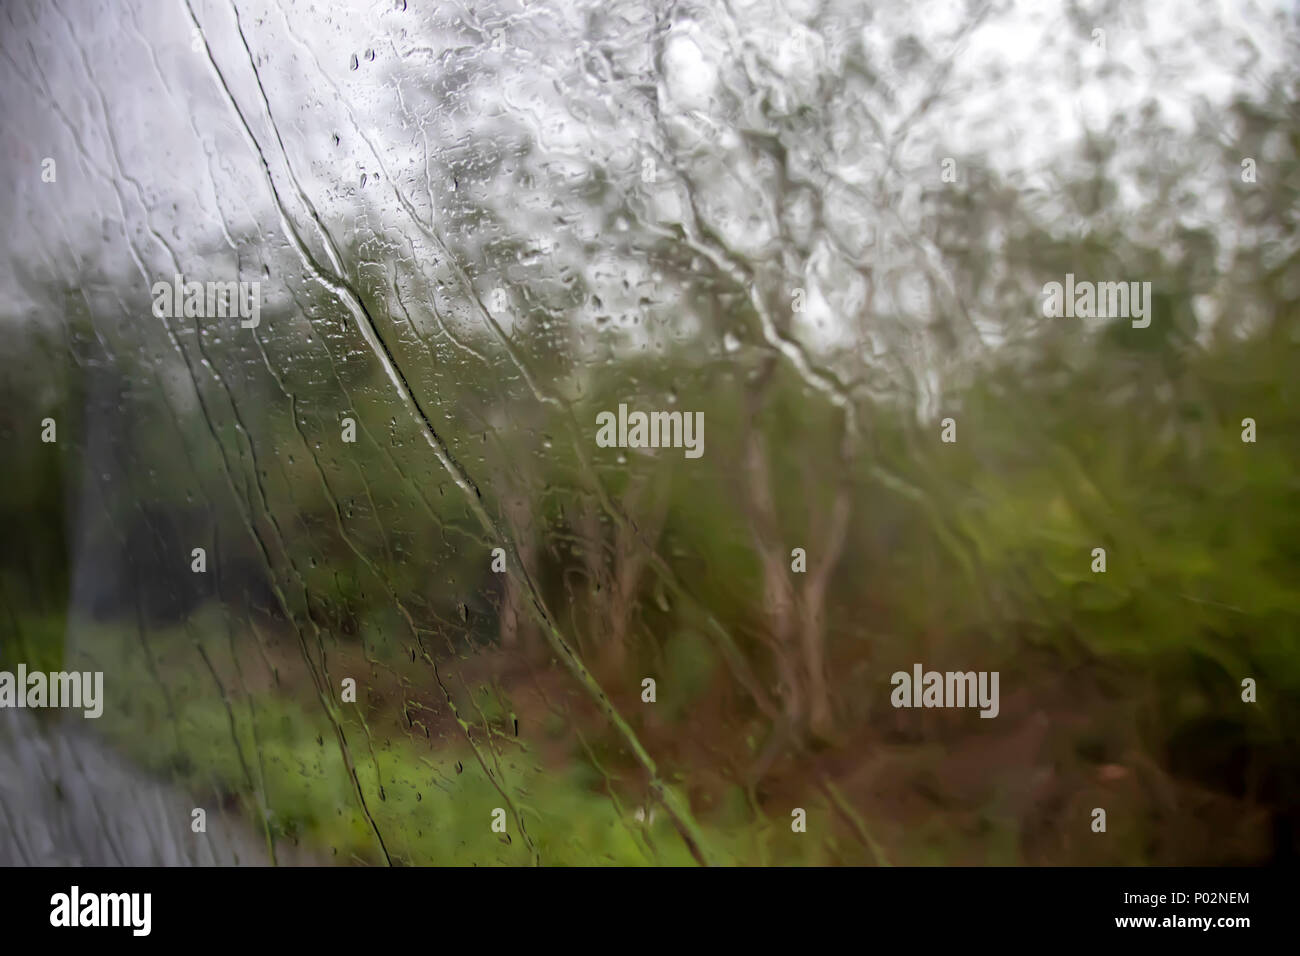 Streams of rain flow down on the window surface. Stock Photo